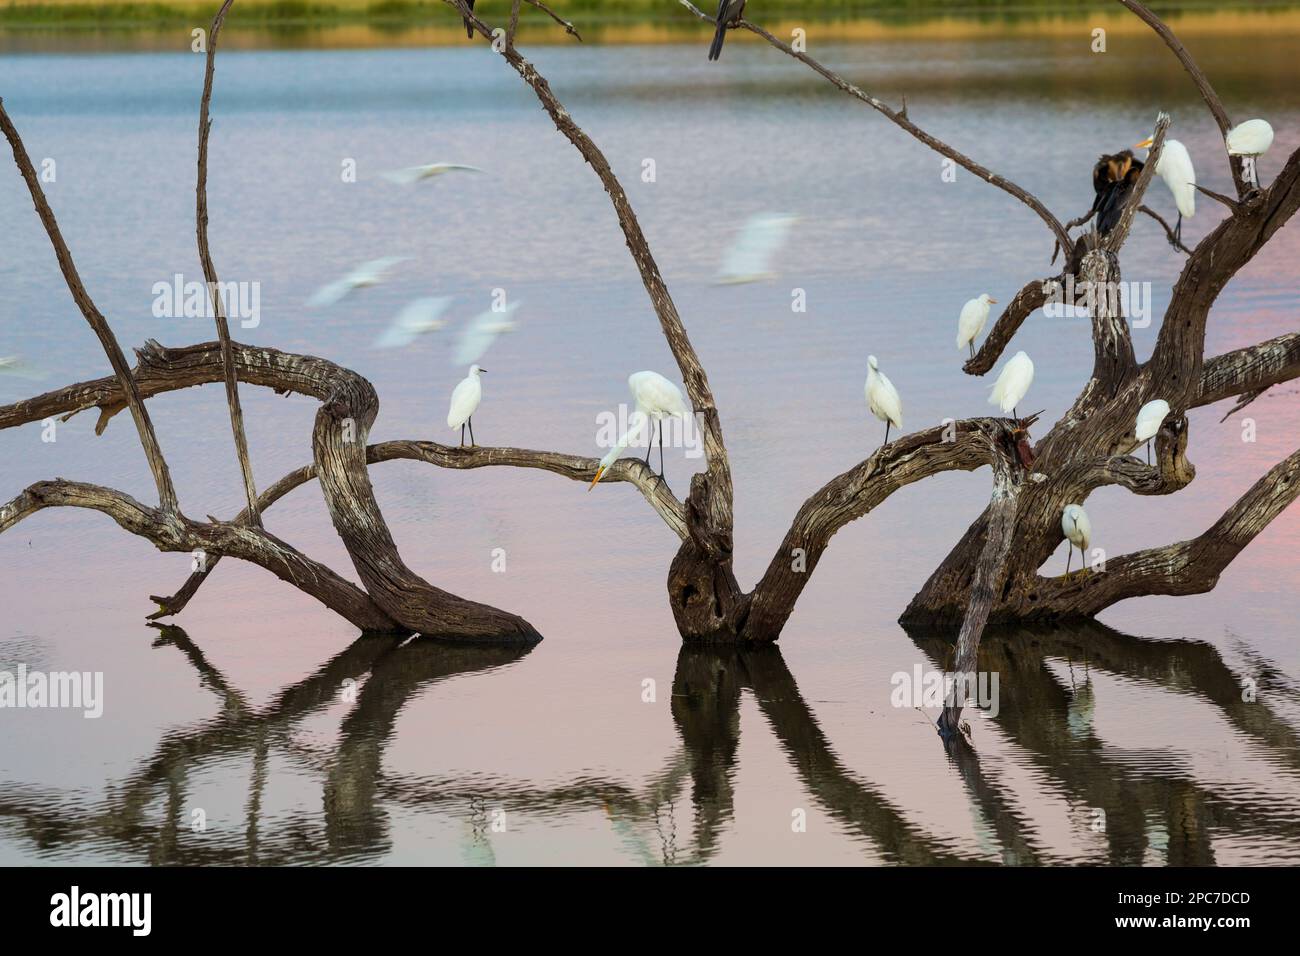 Egrets on branch in lake, Pilanesburg National Park, nr Johannesburg, South Africa Stock Photo